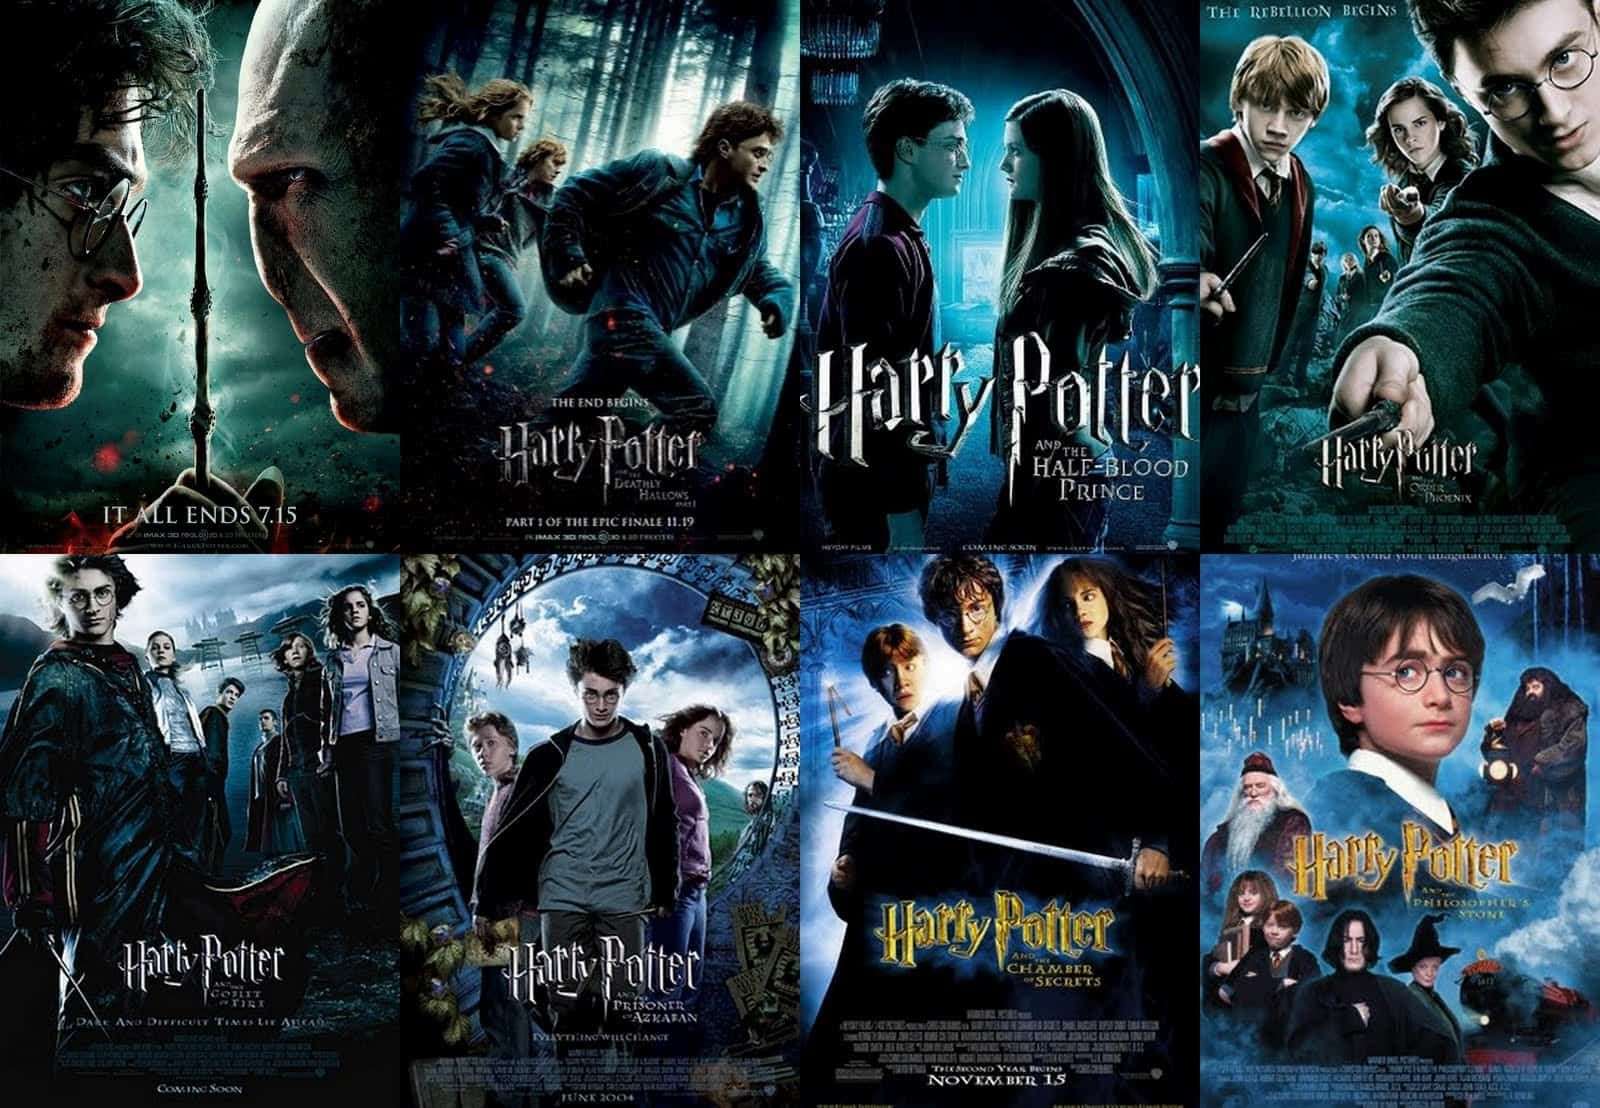 List of Harry Potter Movies in Order